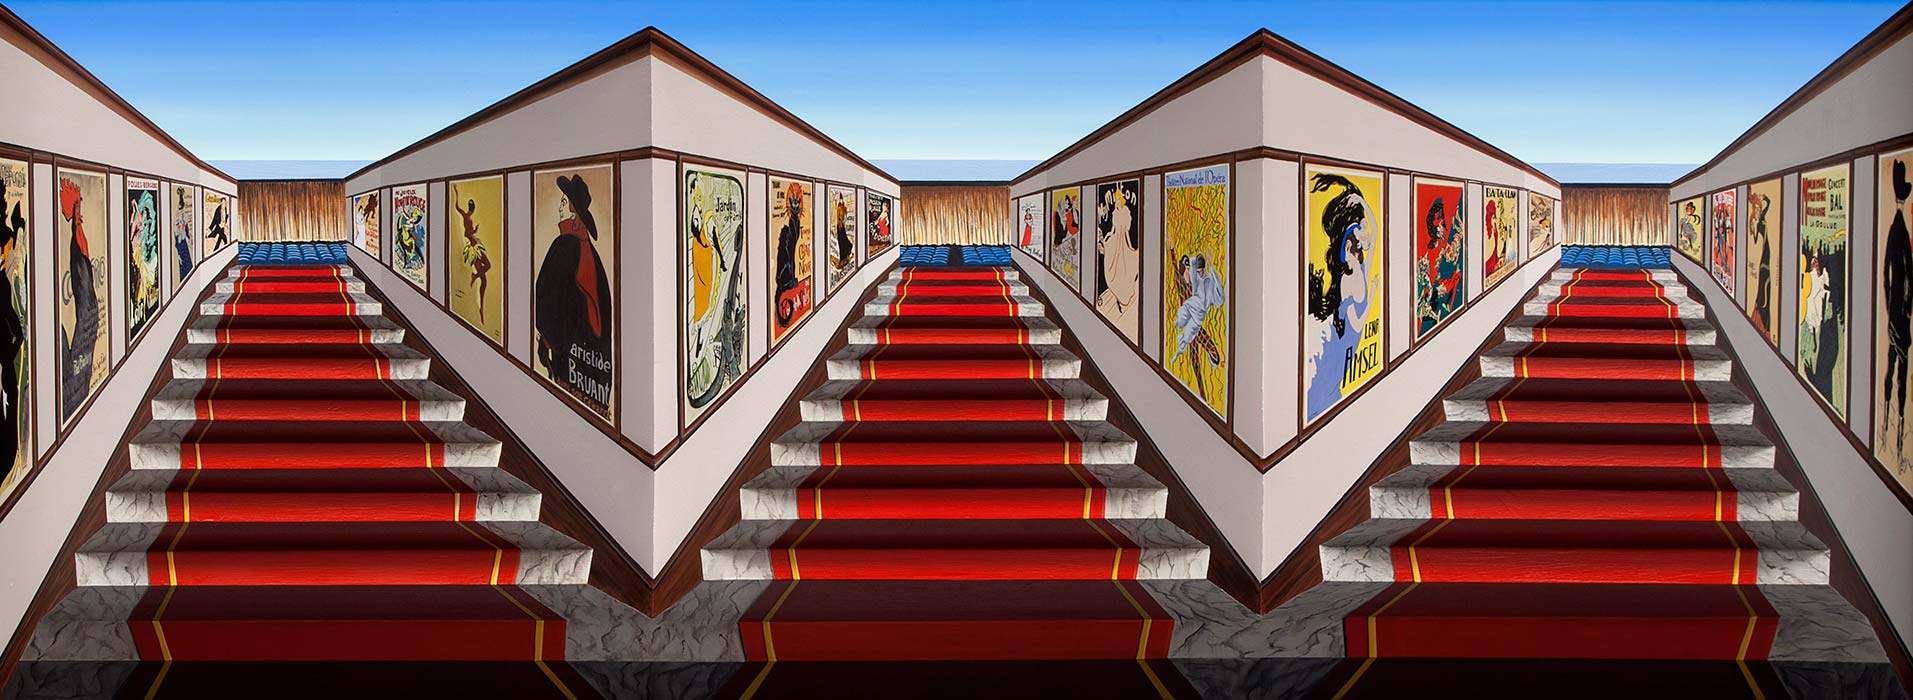 Stairs to the Stars <p>2016 | 60.5 x 160 x 25 cm / 23⅞ x 63 x 9⅞ in</p>
